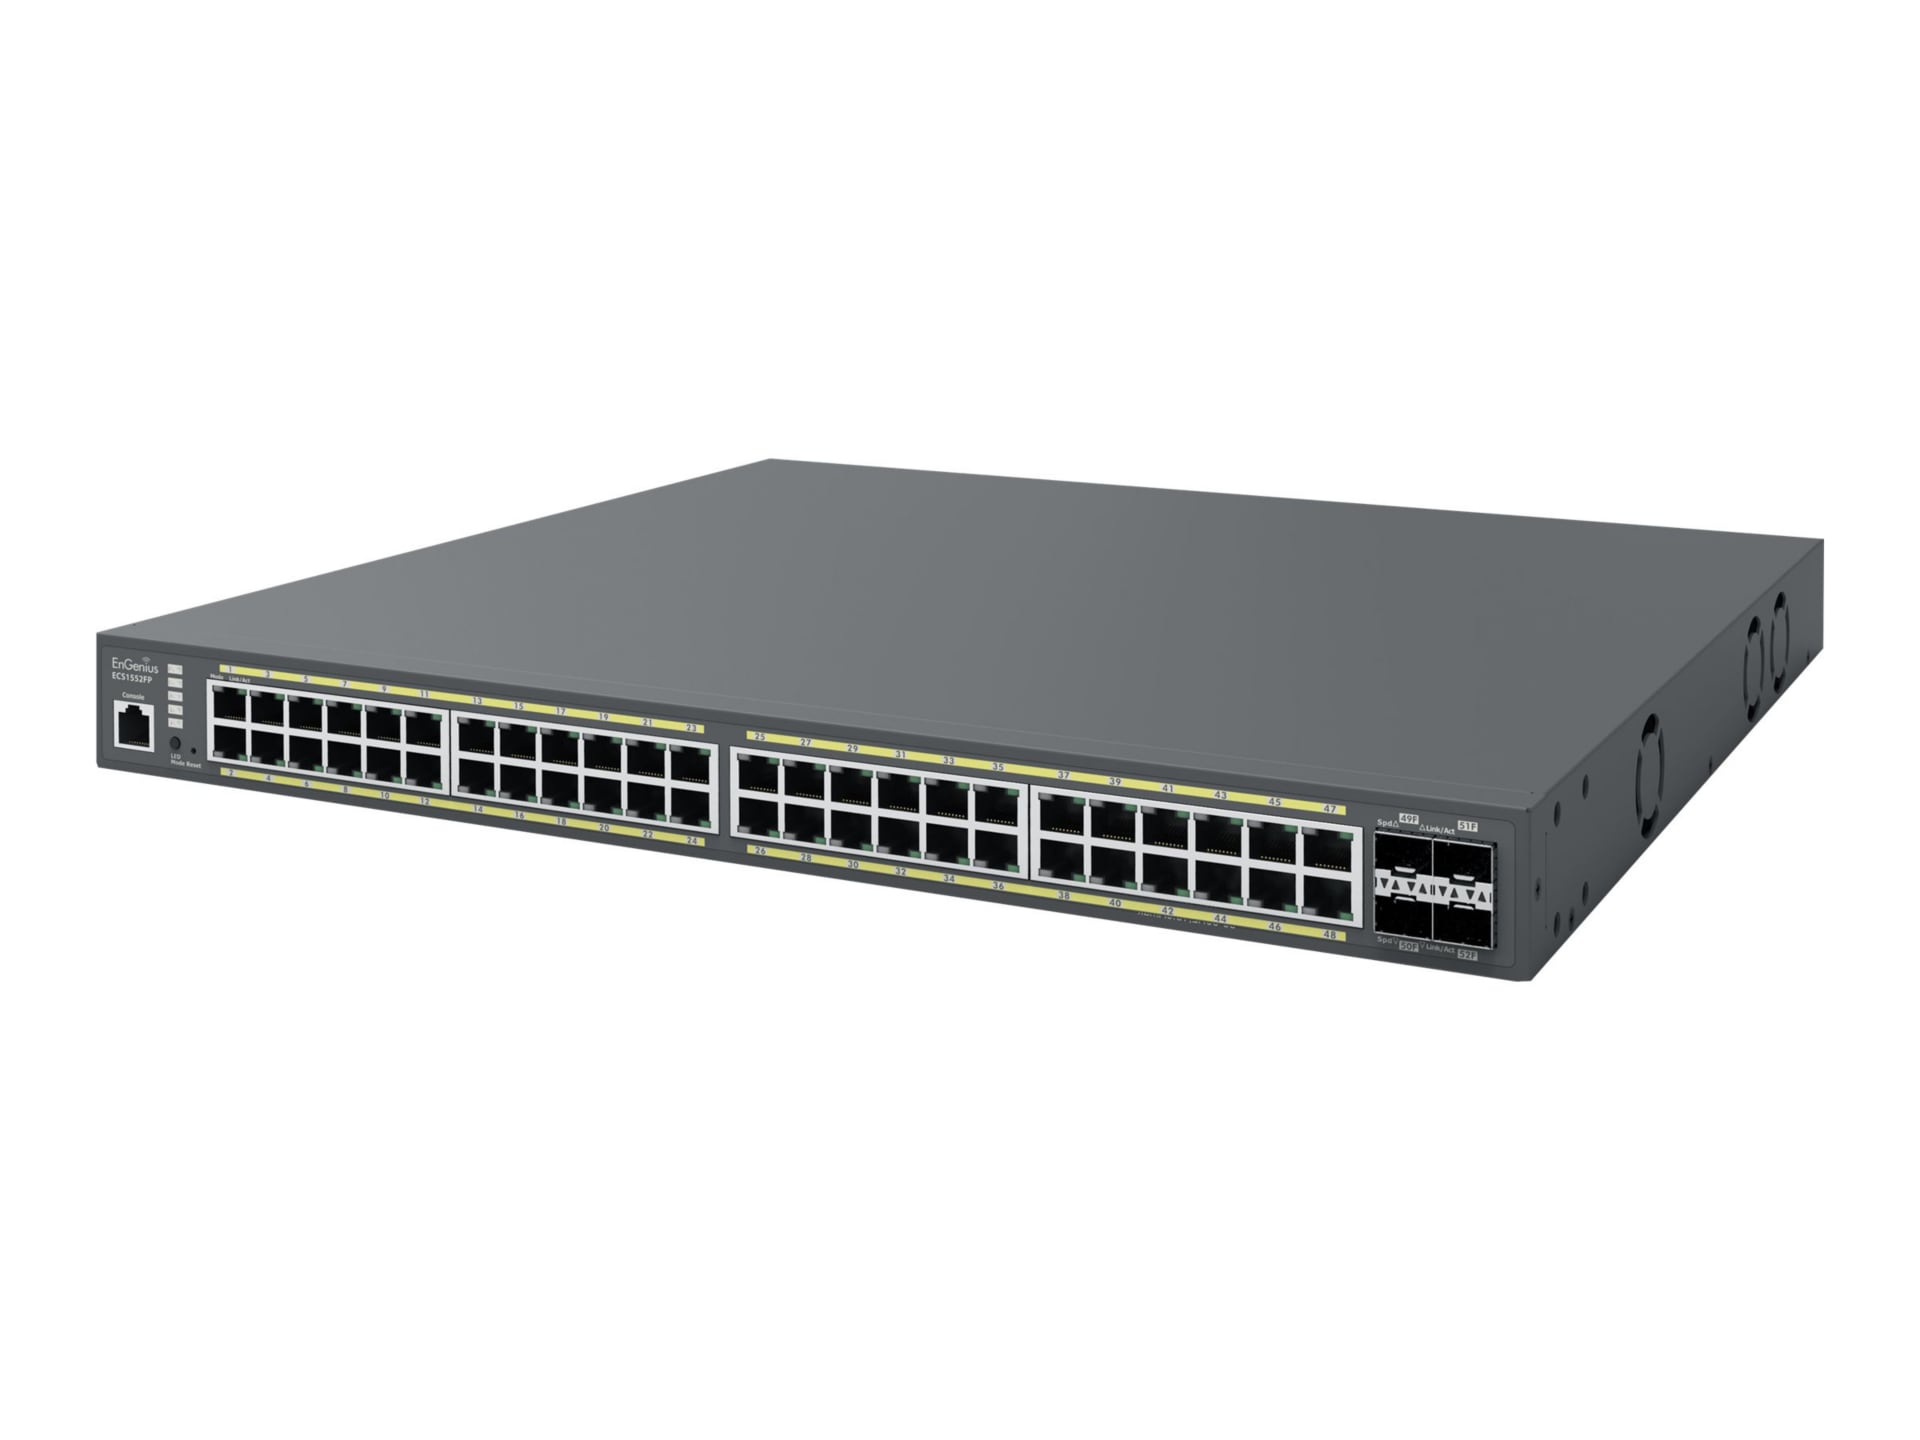 EnGenius Cloud Switch Series ECS1552FP - switch - 48 ports - managed - rack-mountable